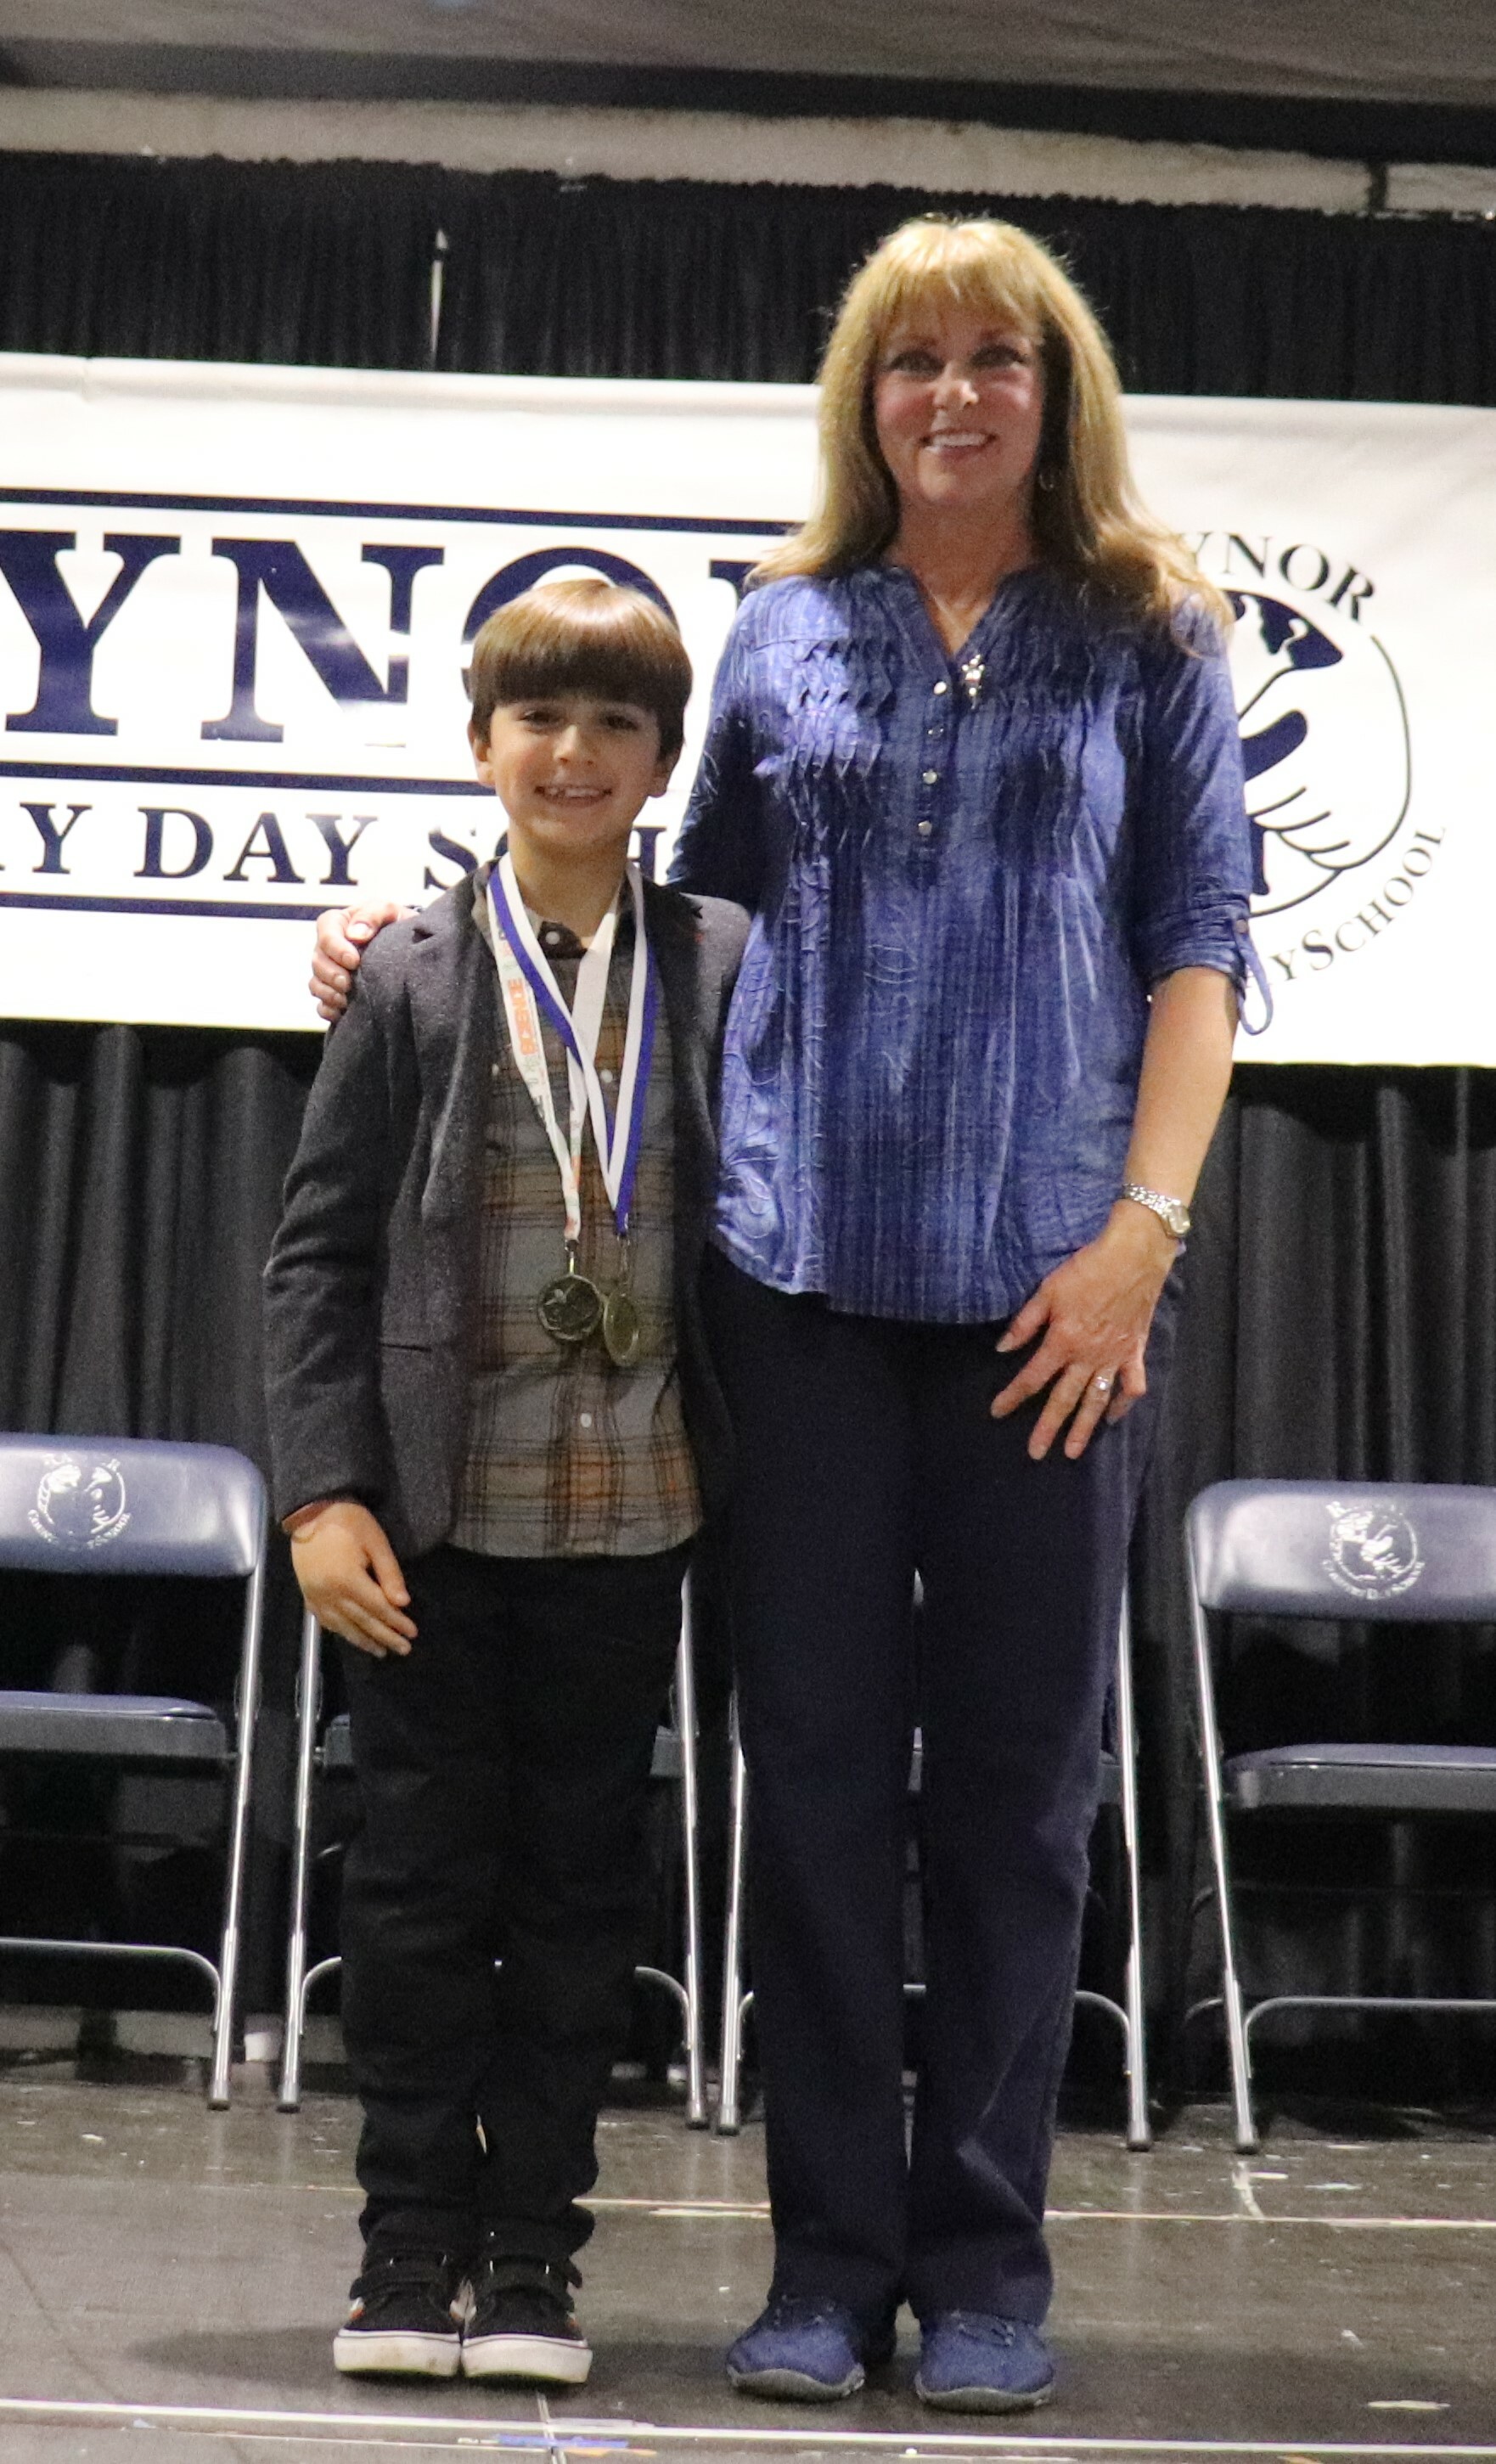 Raynor Country Day School Science Fair coordinator Elaine Marshall with third-grader Levi Beaver after he wone Best-In-Fair for his entry, The Science of Sticks in the competition. COURTESY RAYNOR COUNTRY DAY SCHOOL